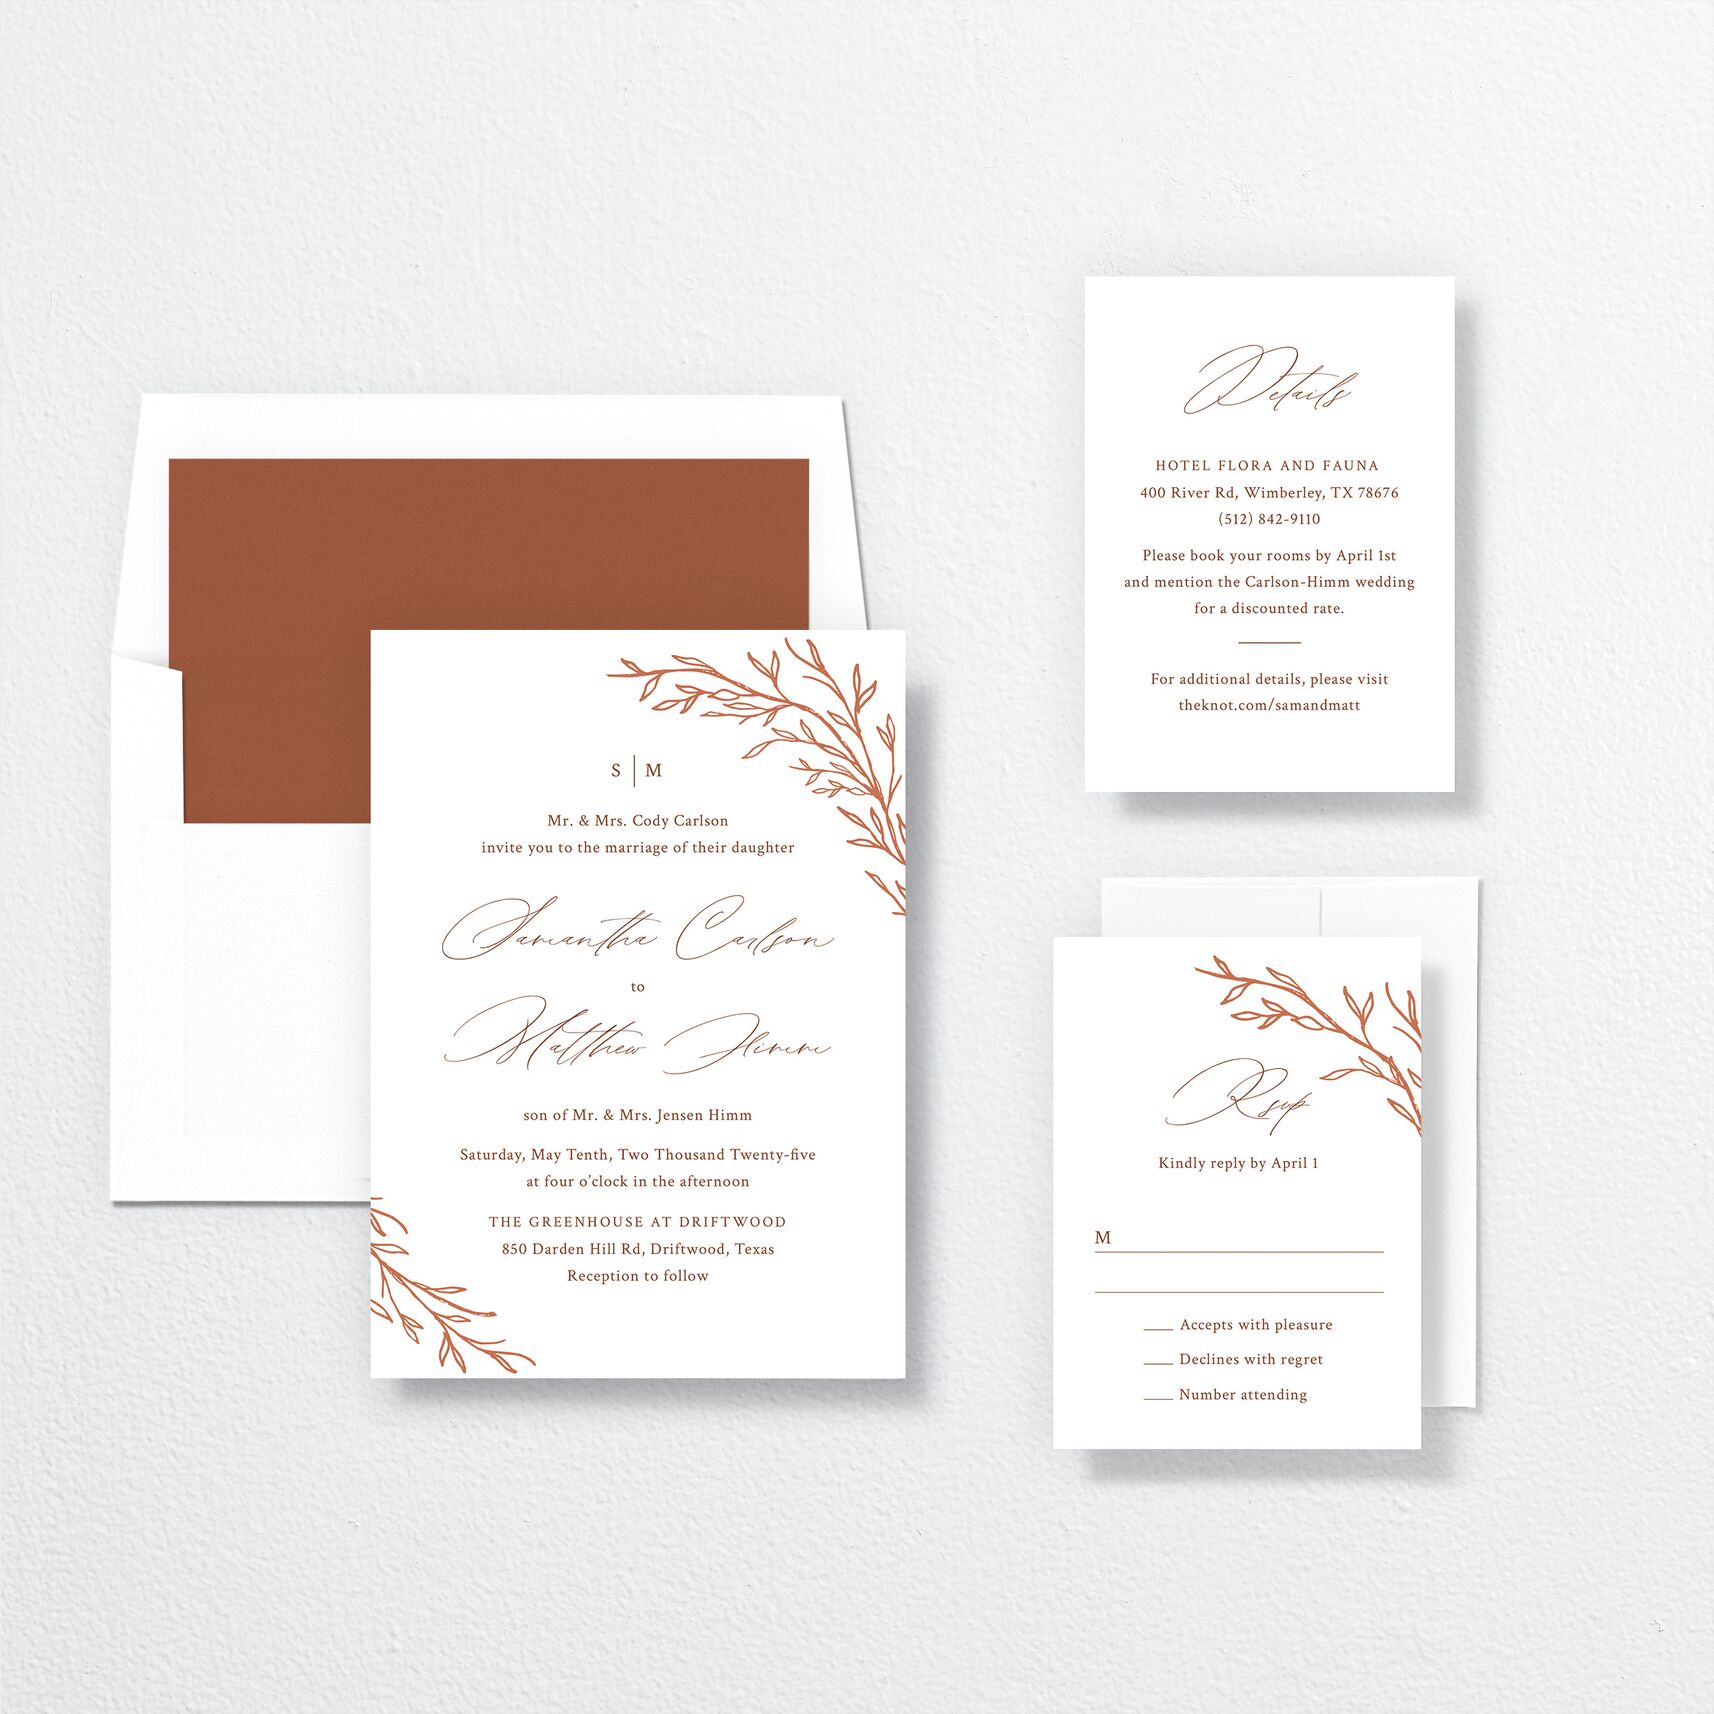 Rustic Branches Wedding Invitations suite in red